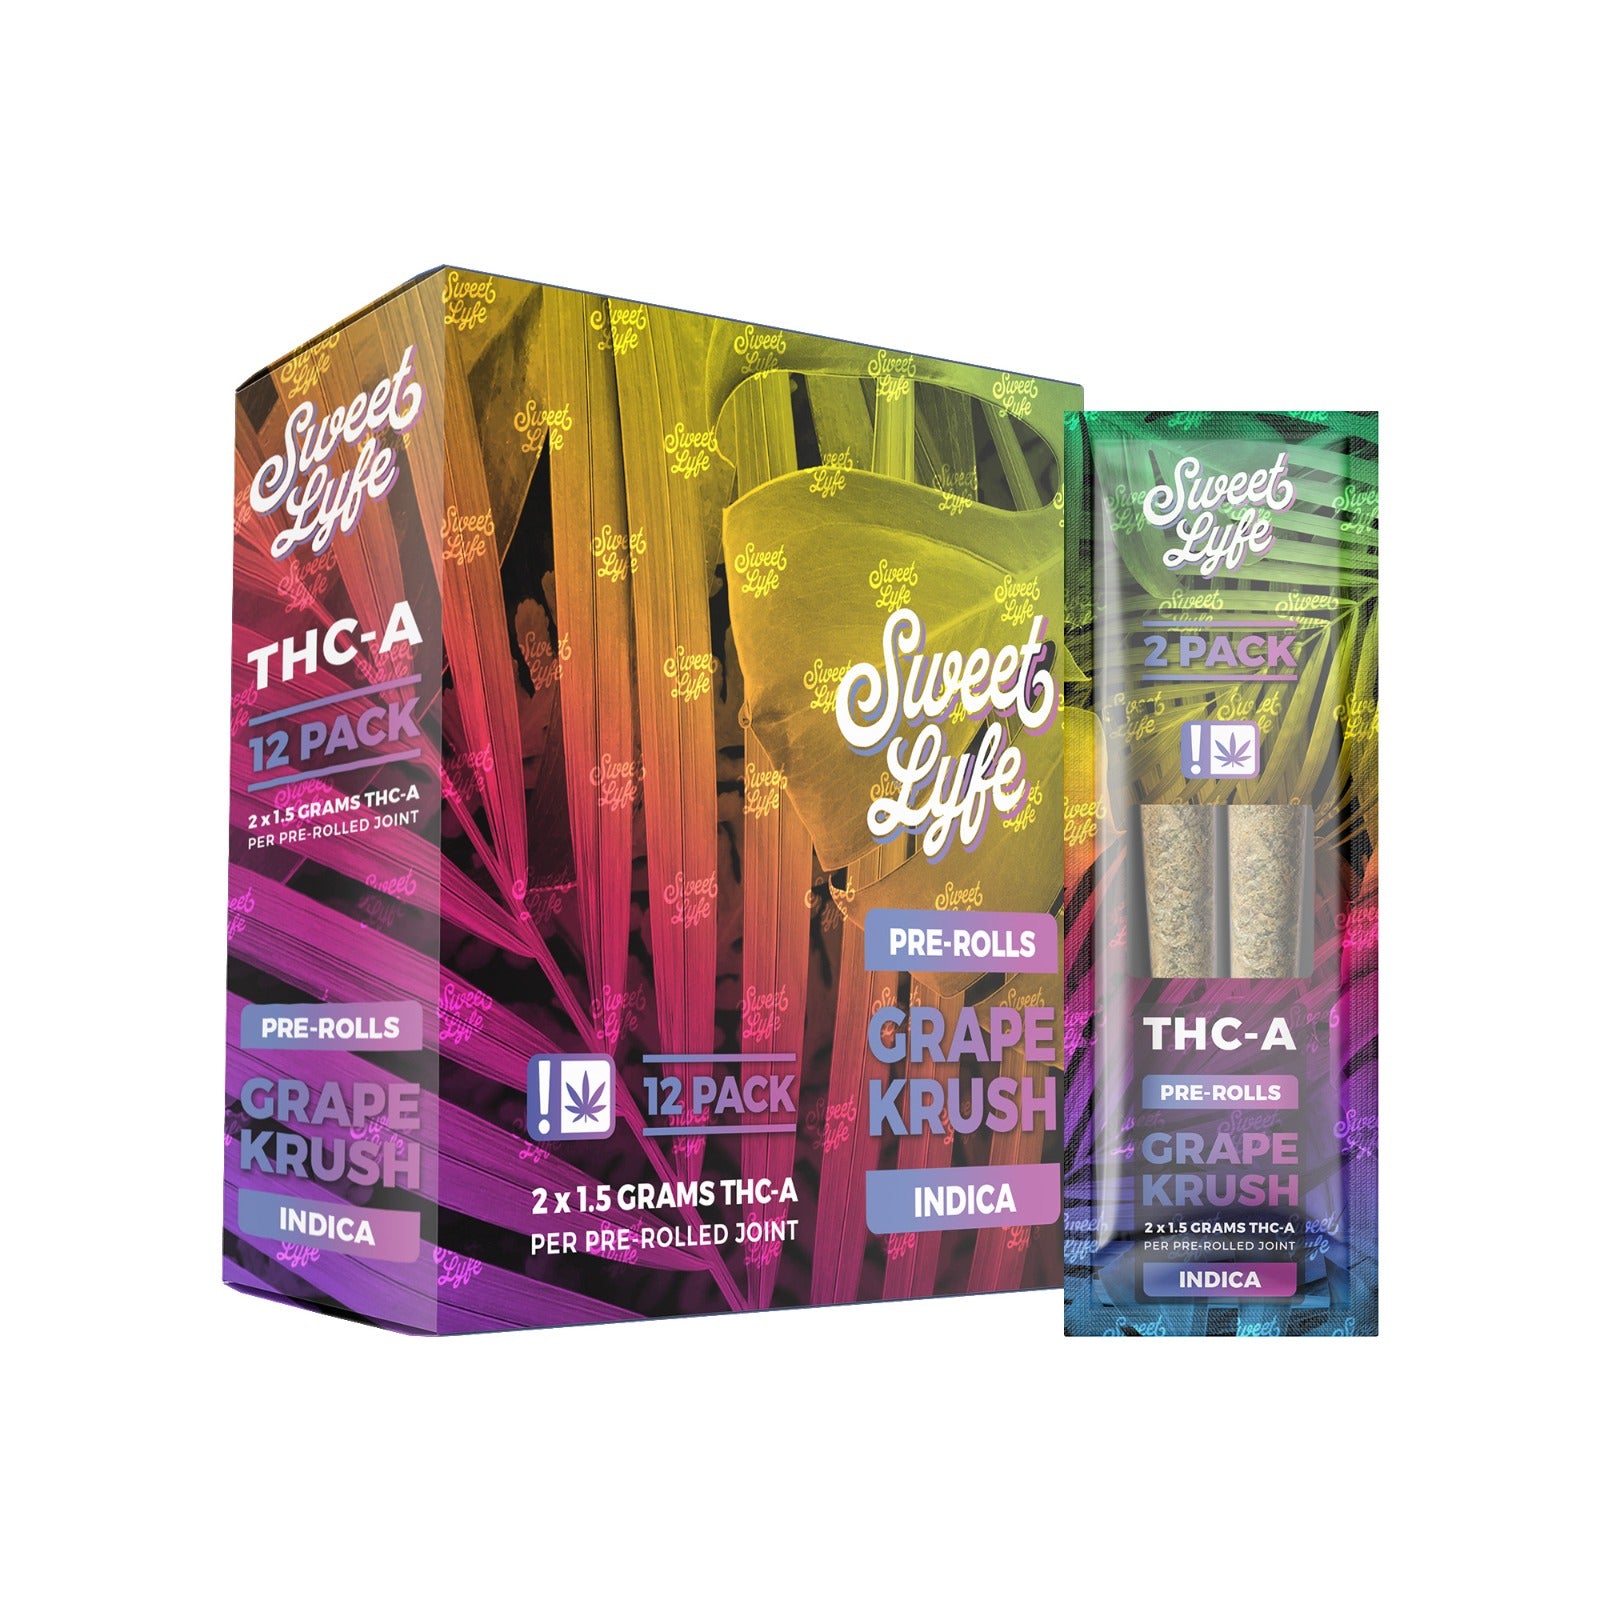 2 Pack Pre-Rolls Joint THC-A|Grape Krush - Indica